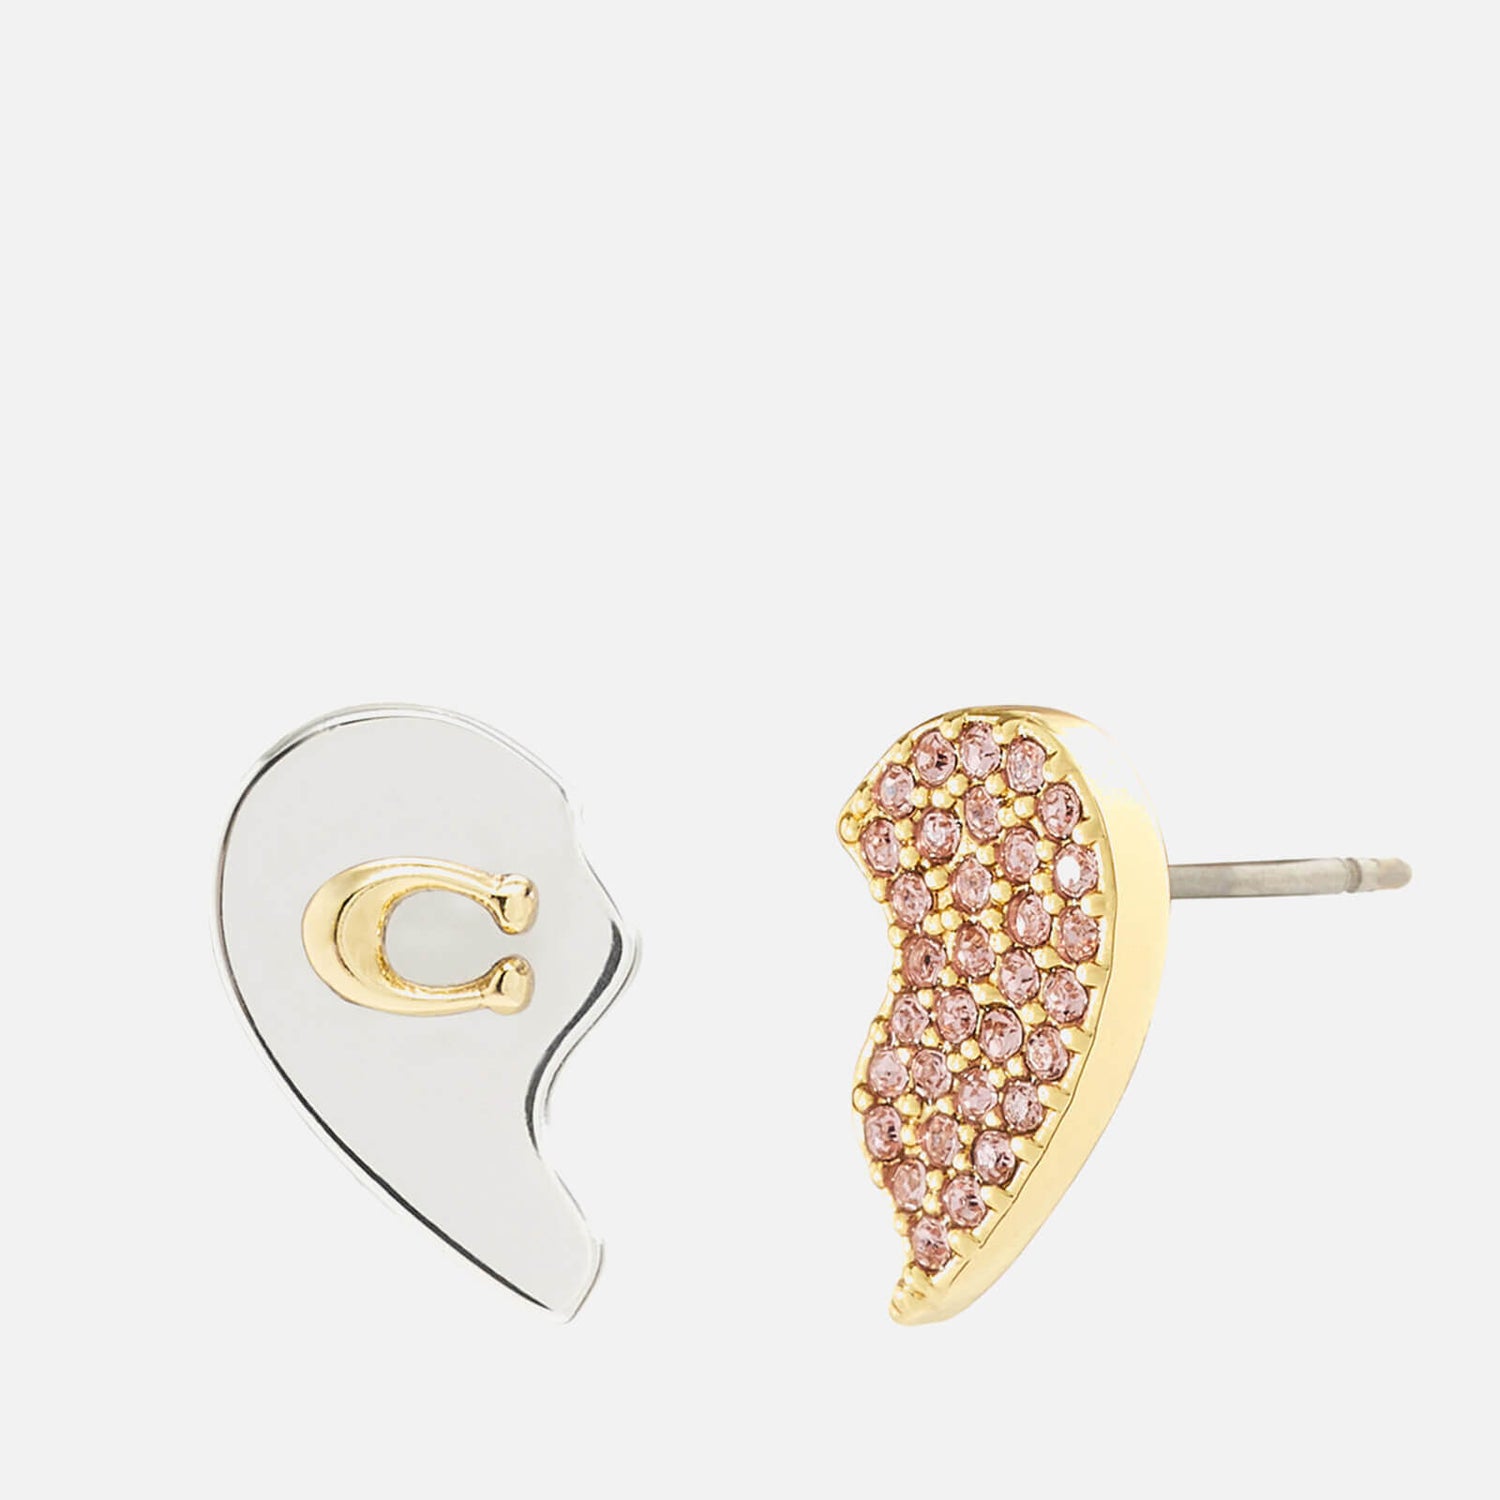 Coach Signature Mismatched Heart Gold and Silver-Tone Earrings